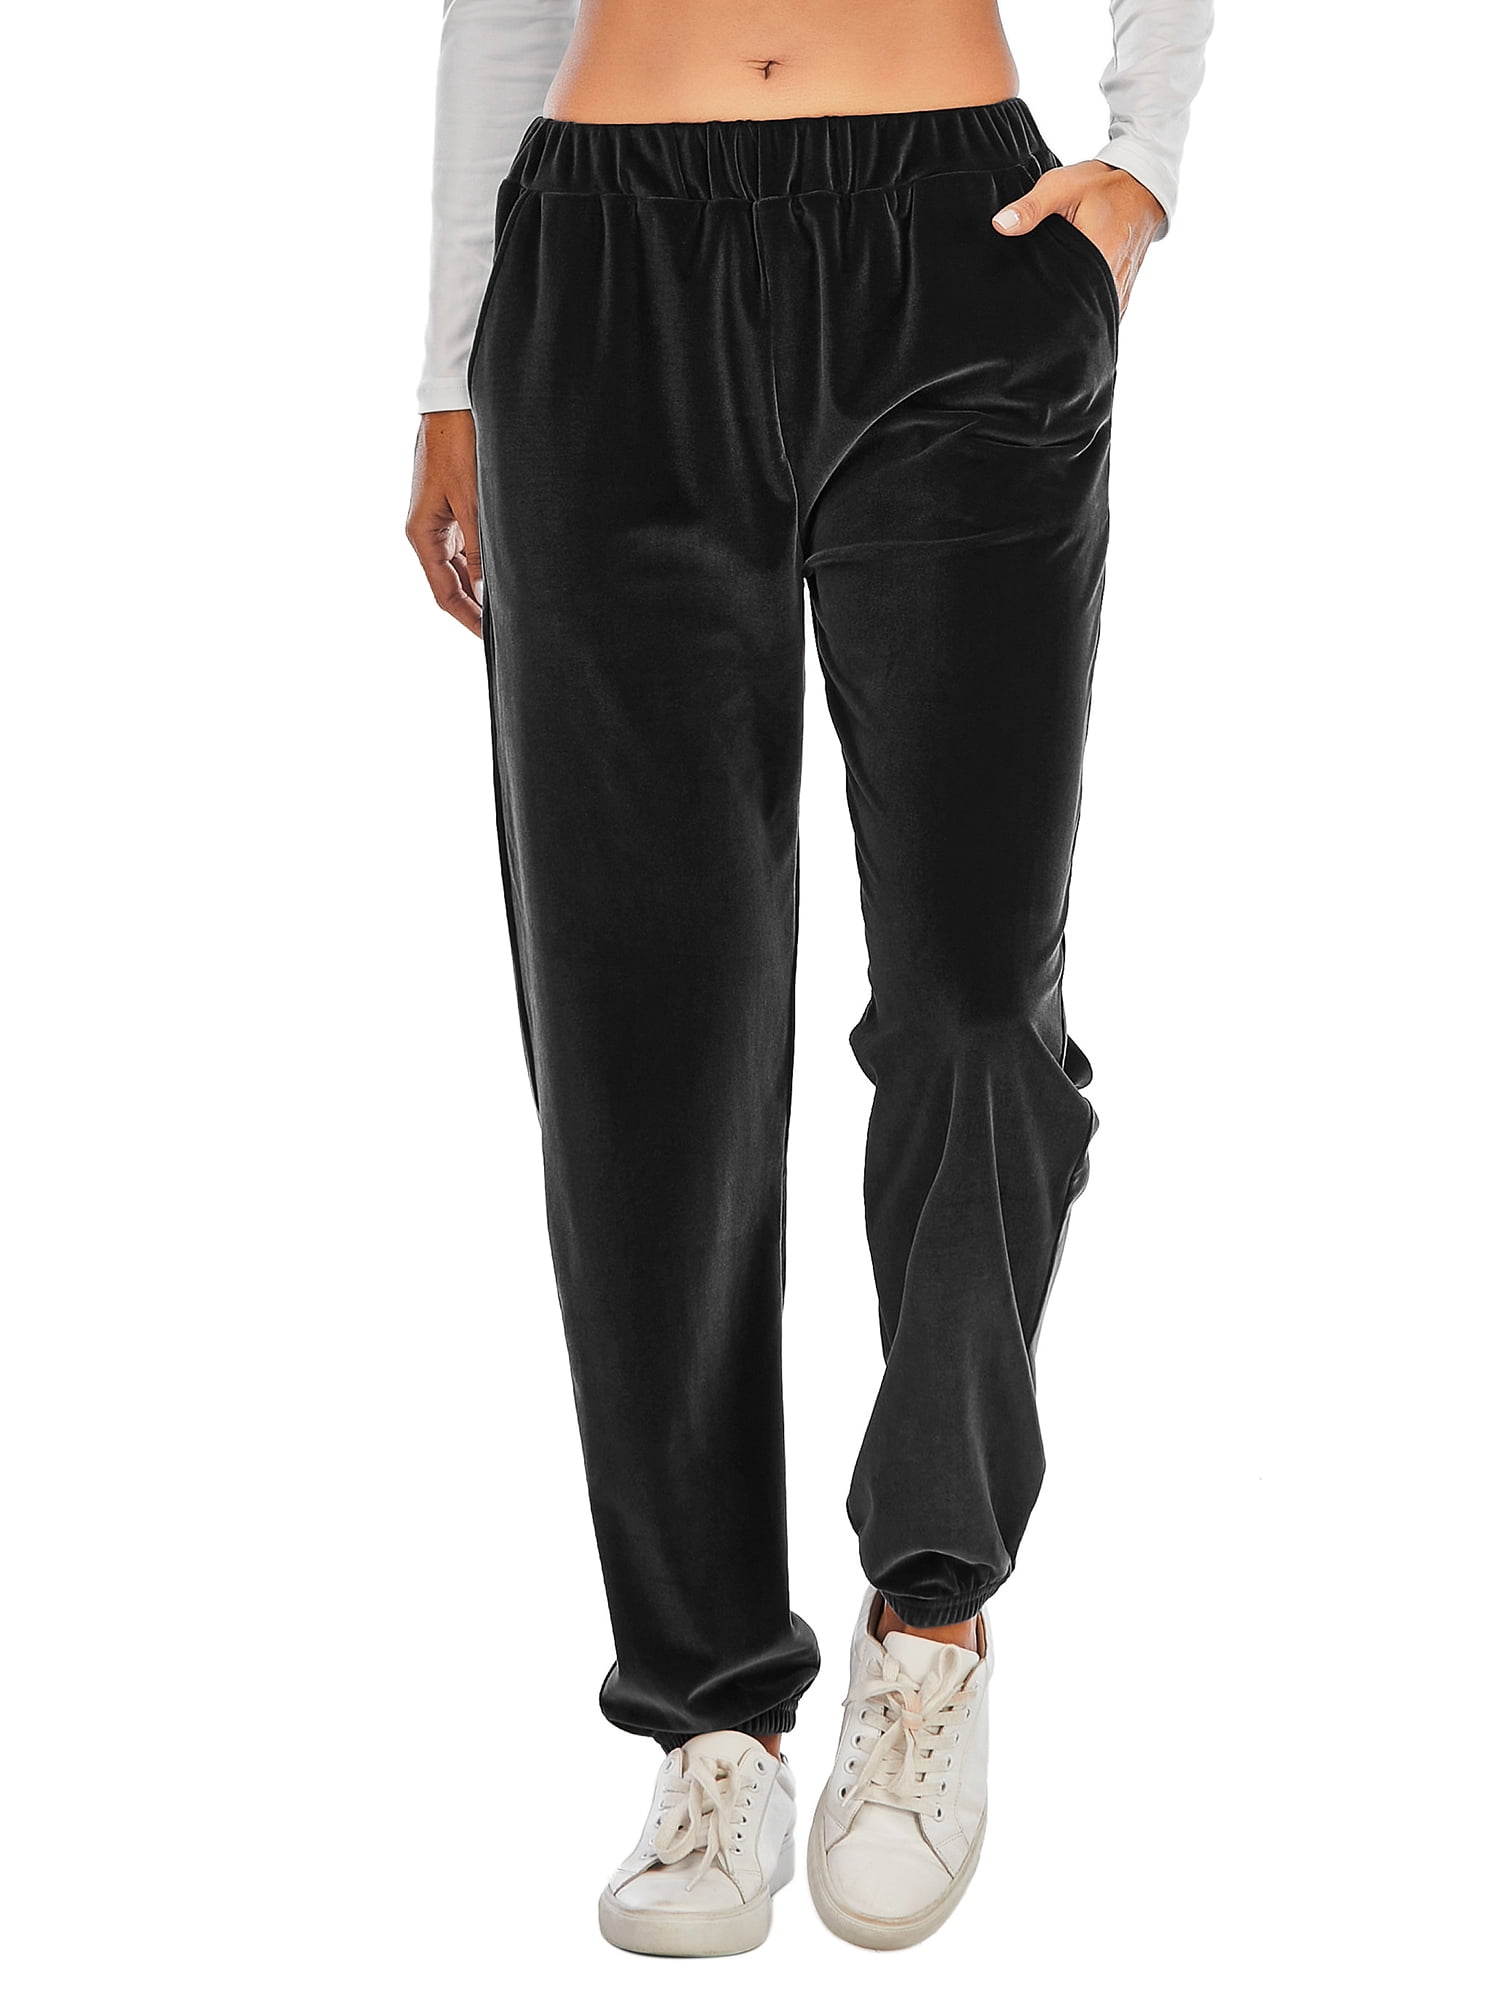 Hawiton Womens Pyjama Bottoms Side Stripes Velour Lounge Pants Casual Sports Trousers Jogging Bottoms 